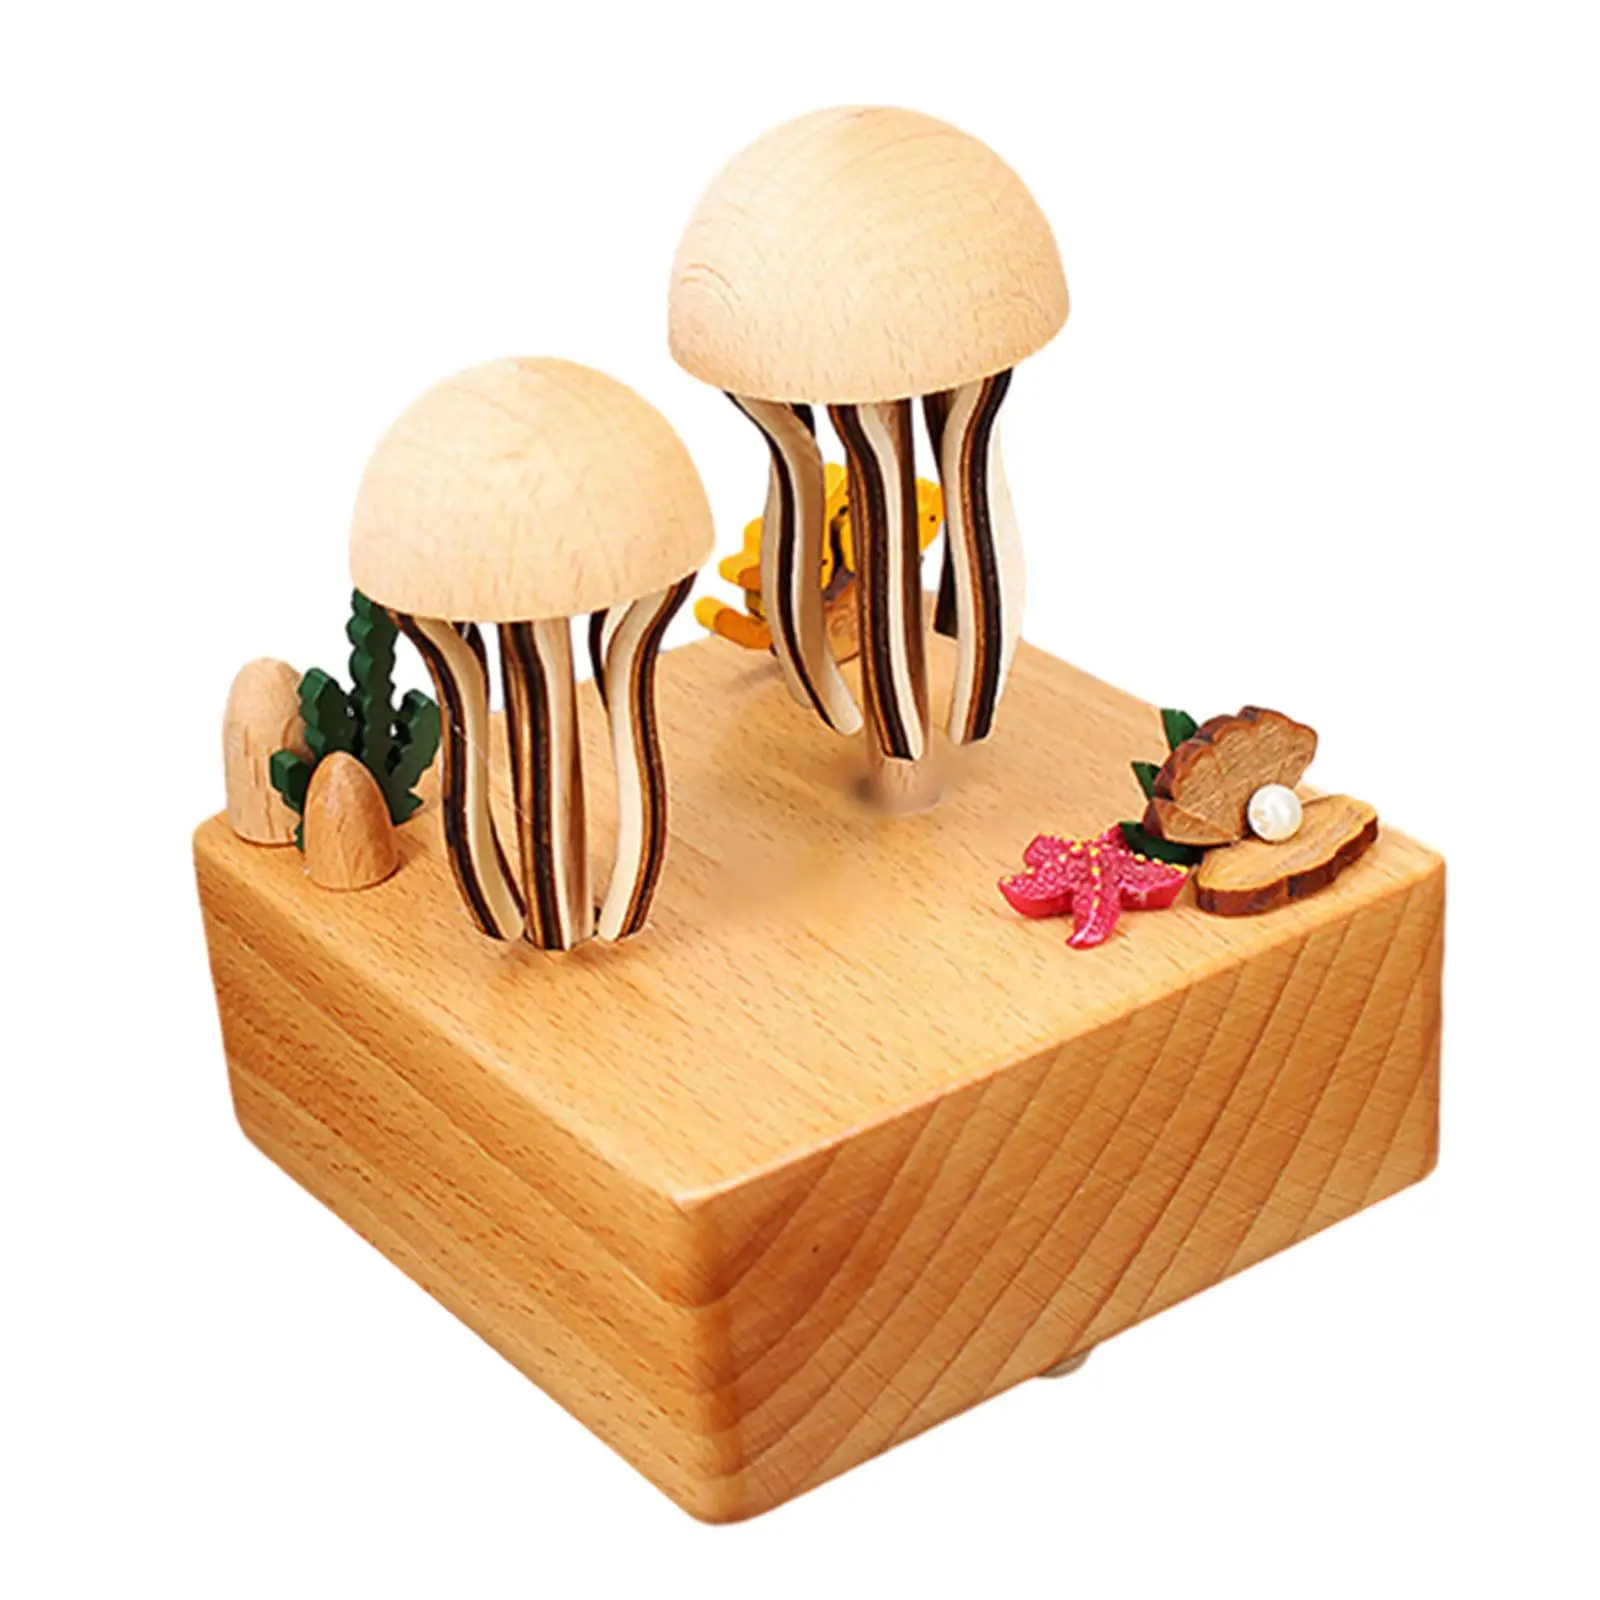 Wooden Jellyfish Music Box, Electric Music Boxes, Music Box with 32 Songs for